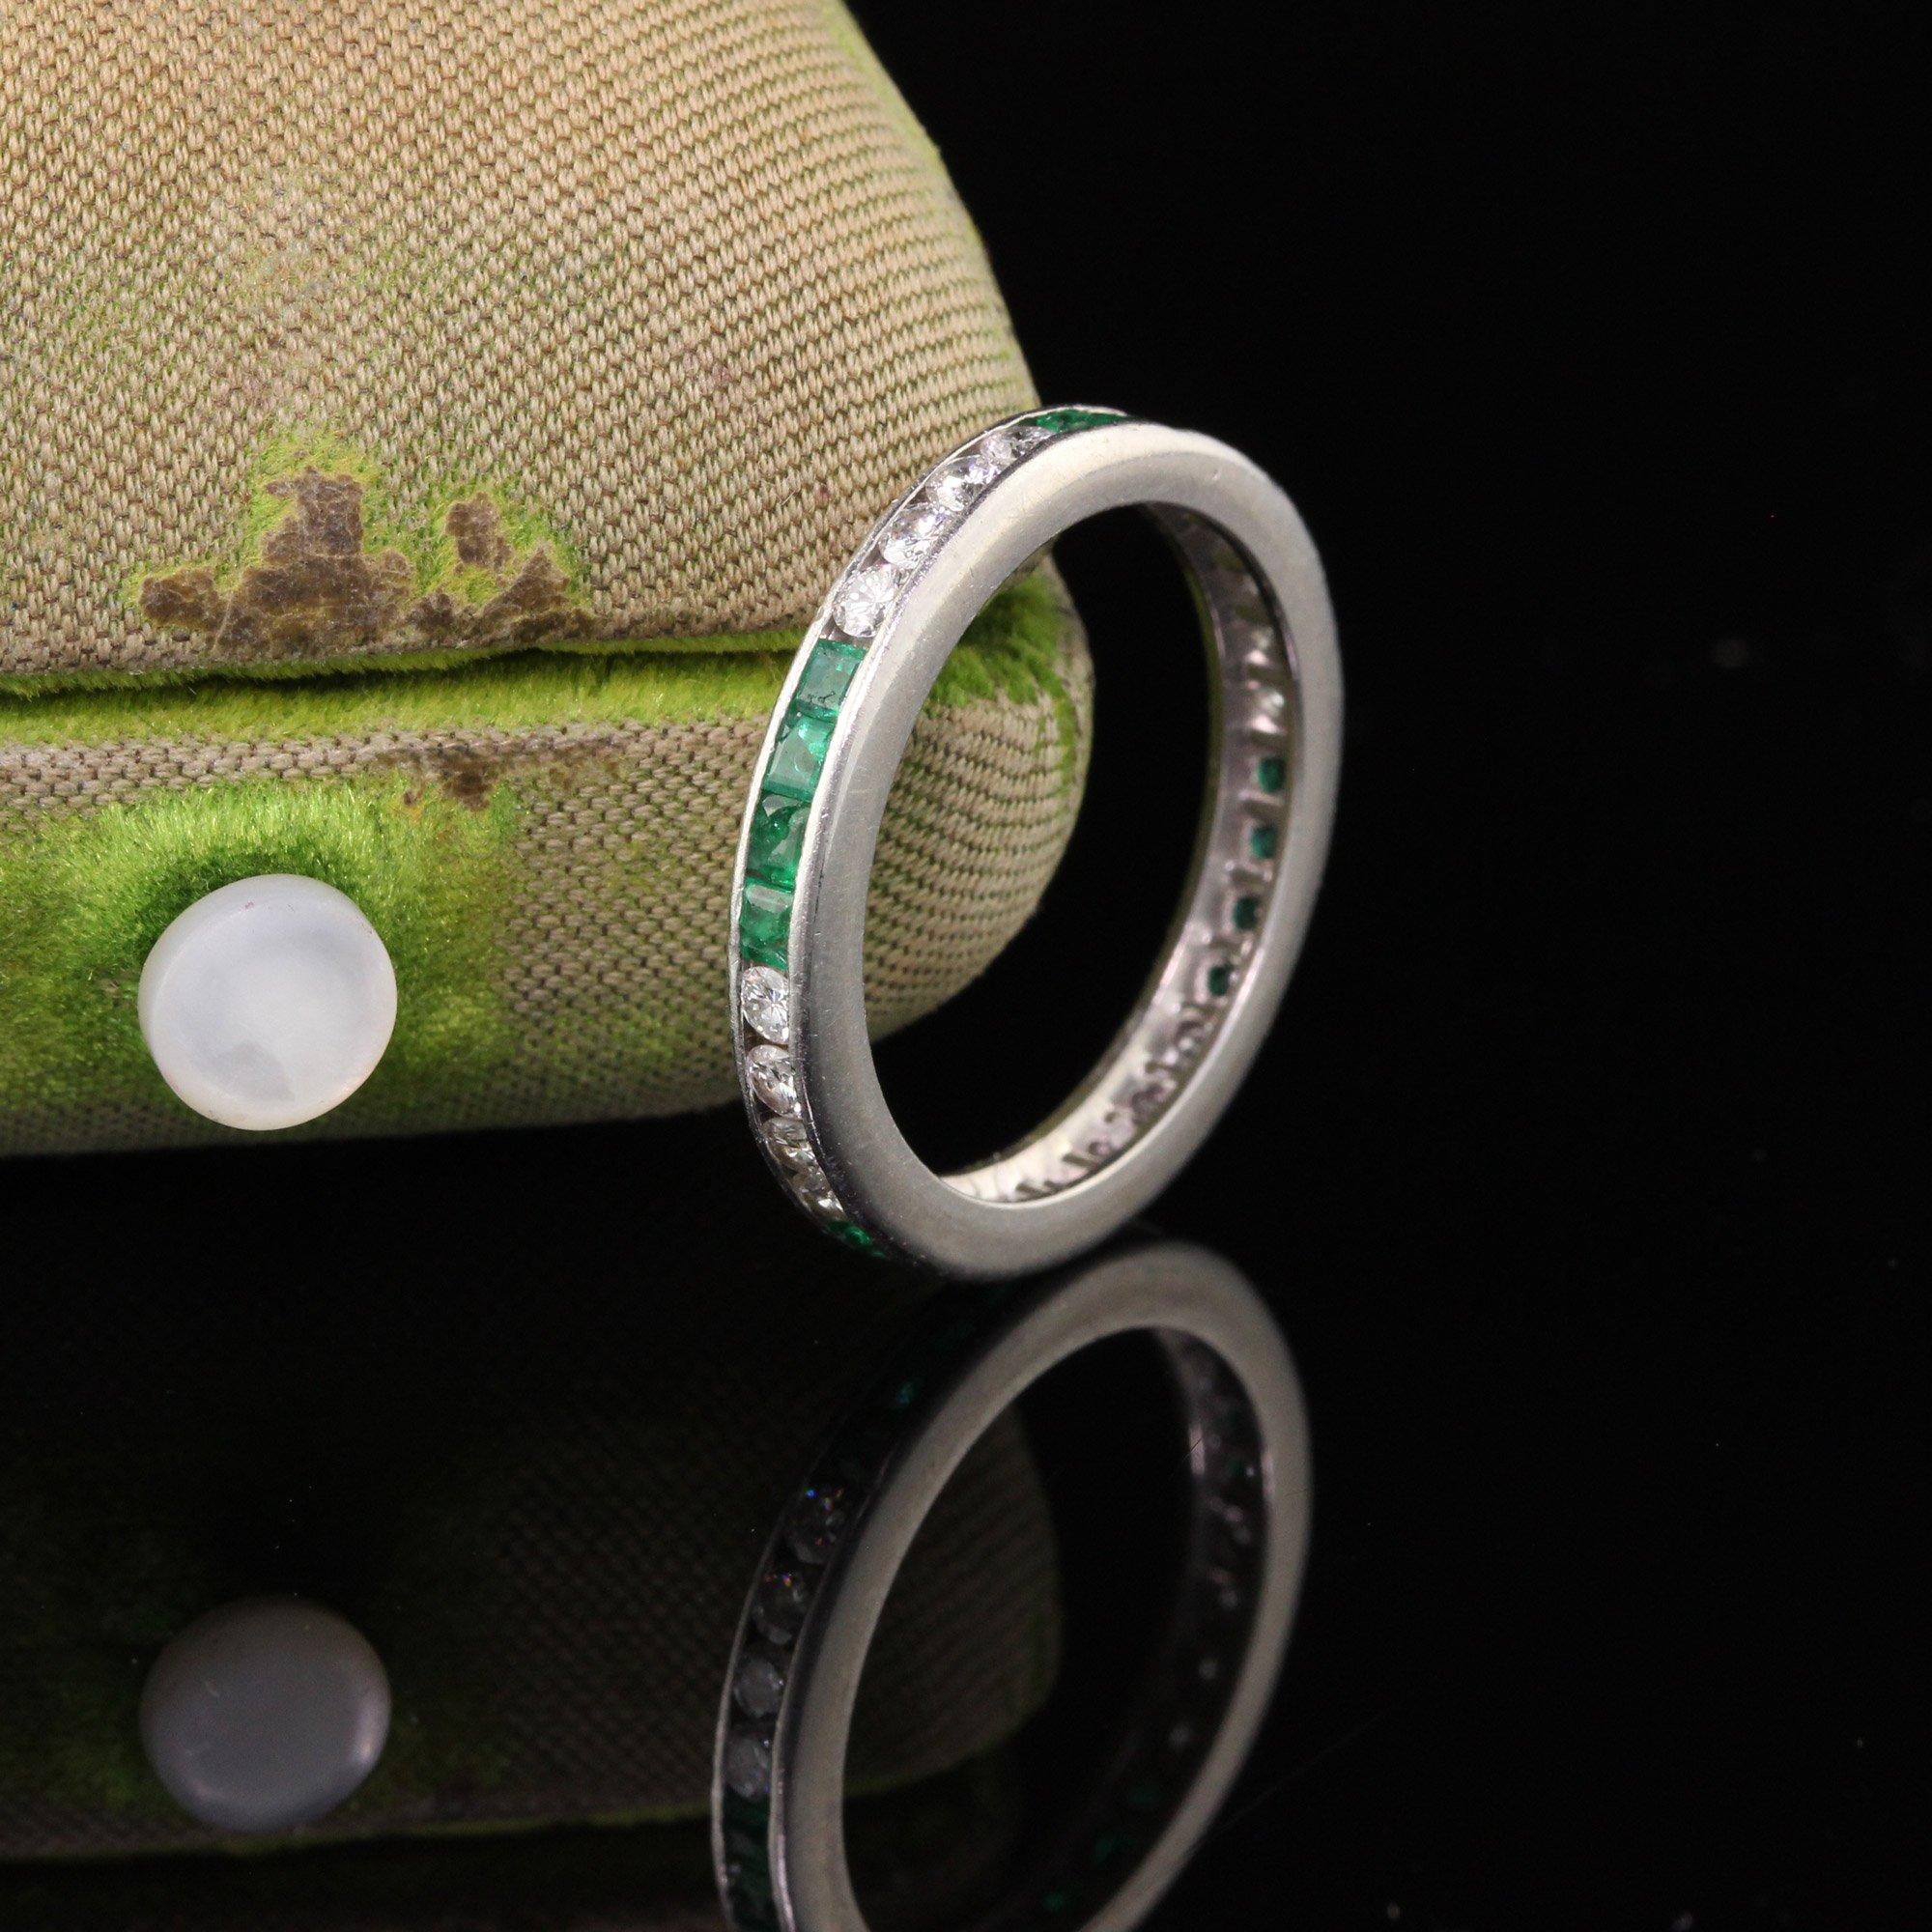 Beautiful Vintage eternity band in platinum with alternating square-cut emeralds and round diamonds in sets of 4. The perfect wedding band or stacking band! Emeralds are a very soft stone and some emeralds have small chips that are only visible with